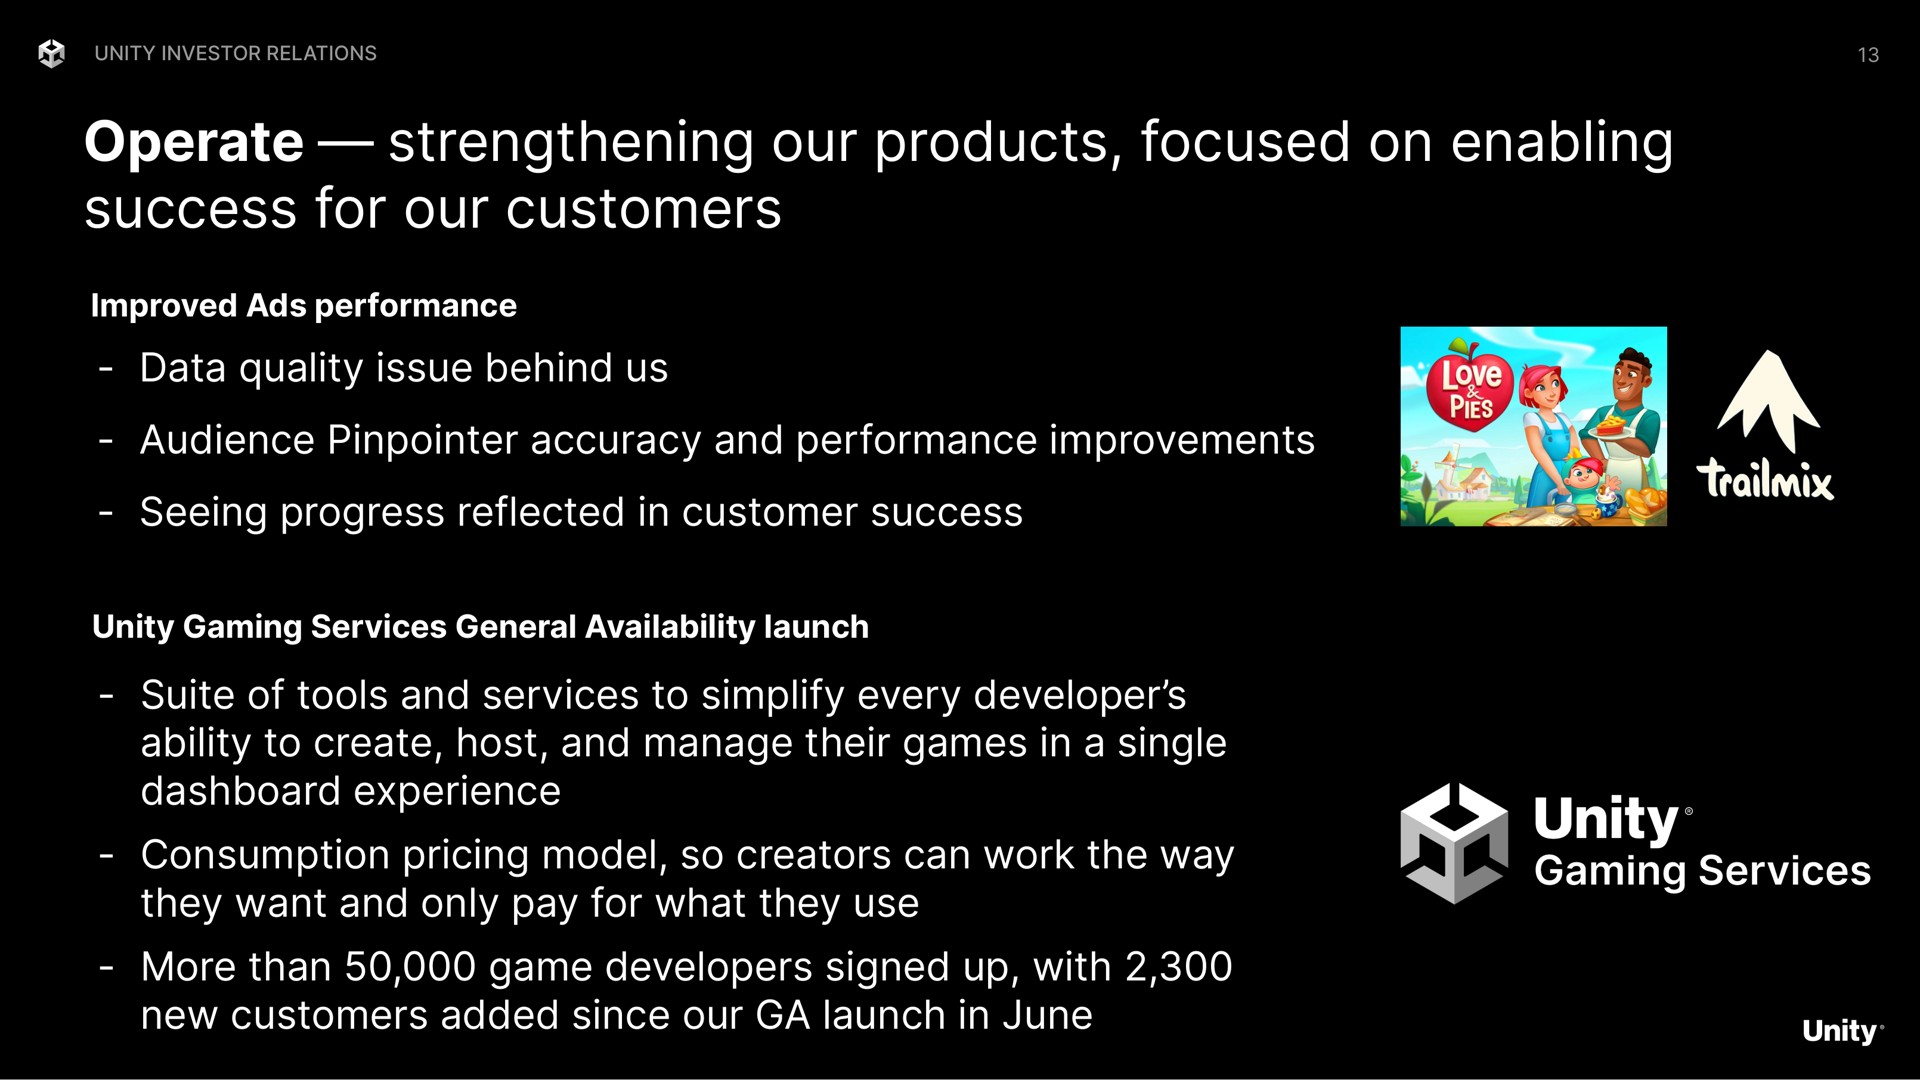 operate strengthening our products focused on enabling success for our customers data quality issue behind us audience accuracy and performance improvements seeing progress reflected in customer success suite of tools and services to simplify every developer ability to create host and manage their games in a single dashboard experience consumption pricing model so creators can work the way they want and only pay for what they use more than game developers signed up with new customers added since our launch in june unity gaming | Unity Software